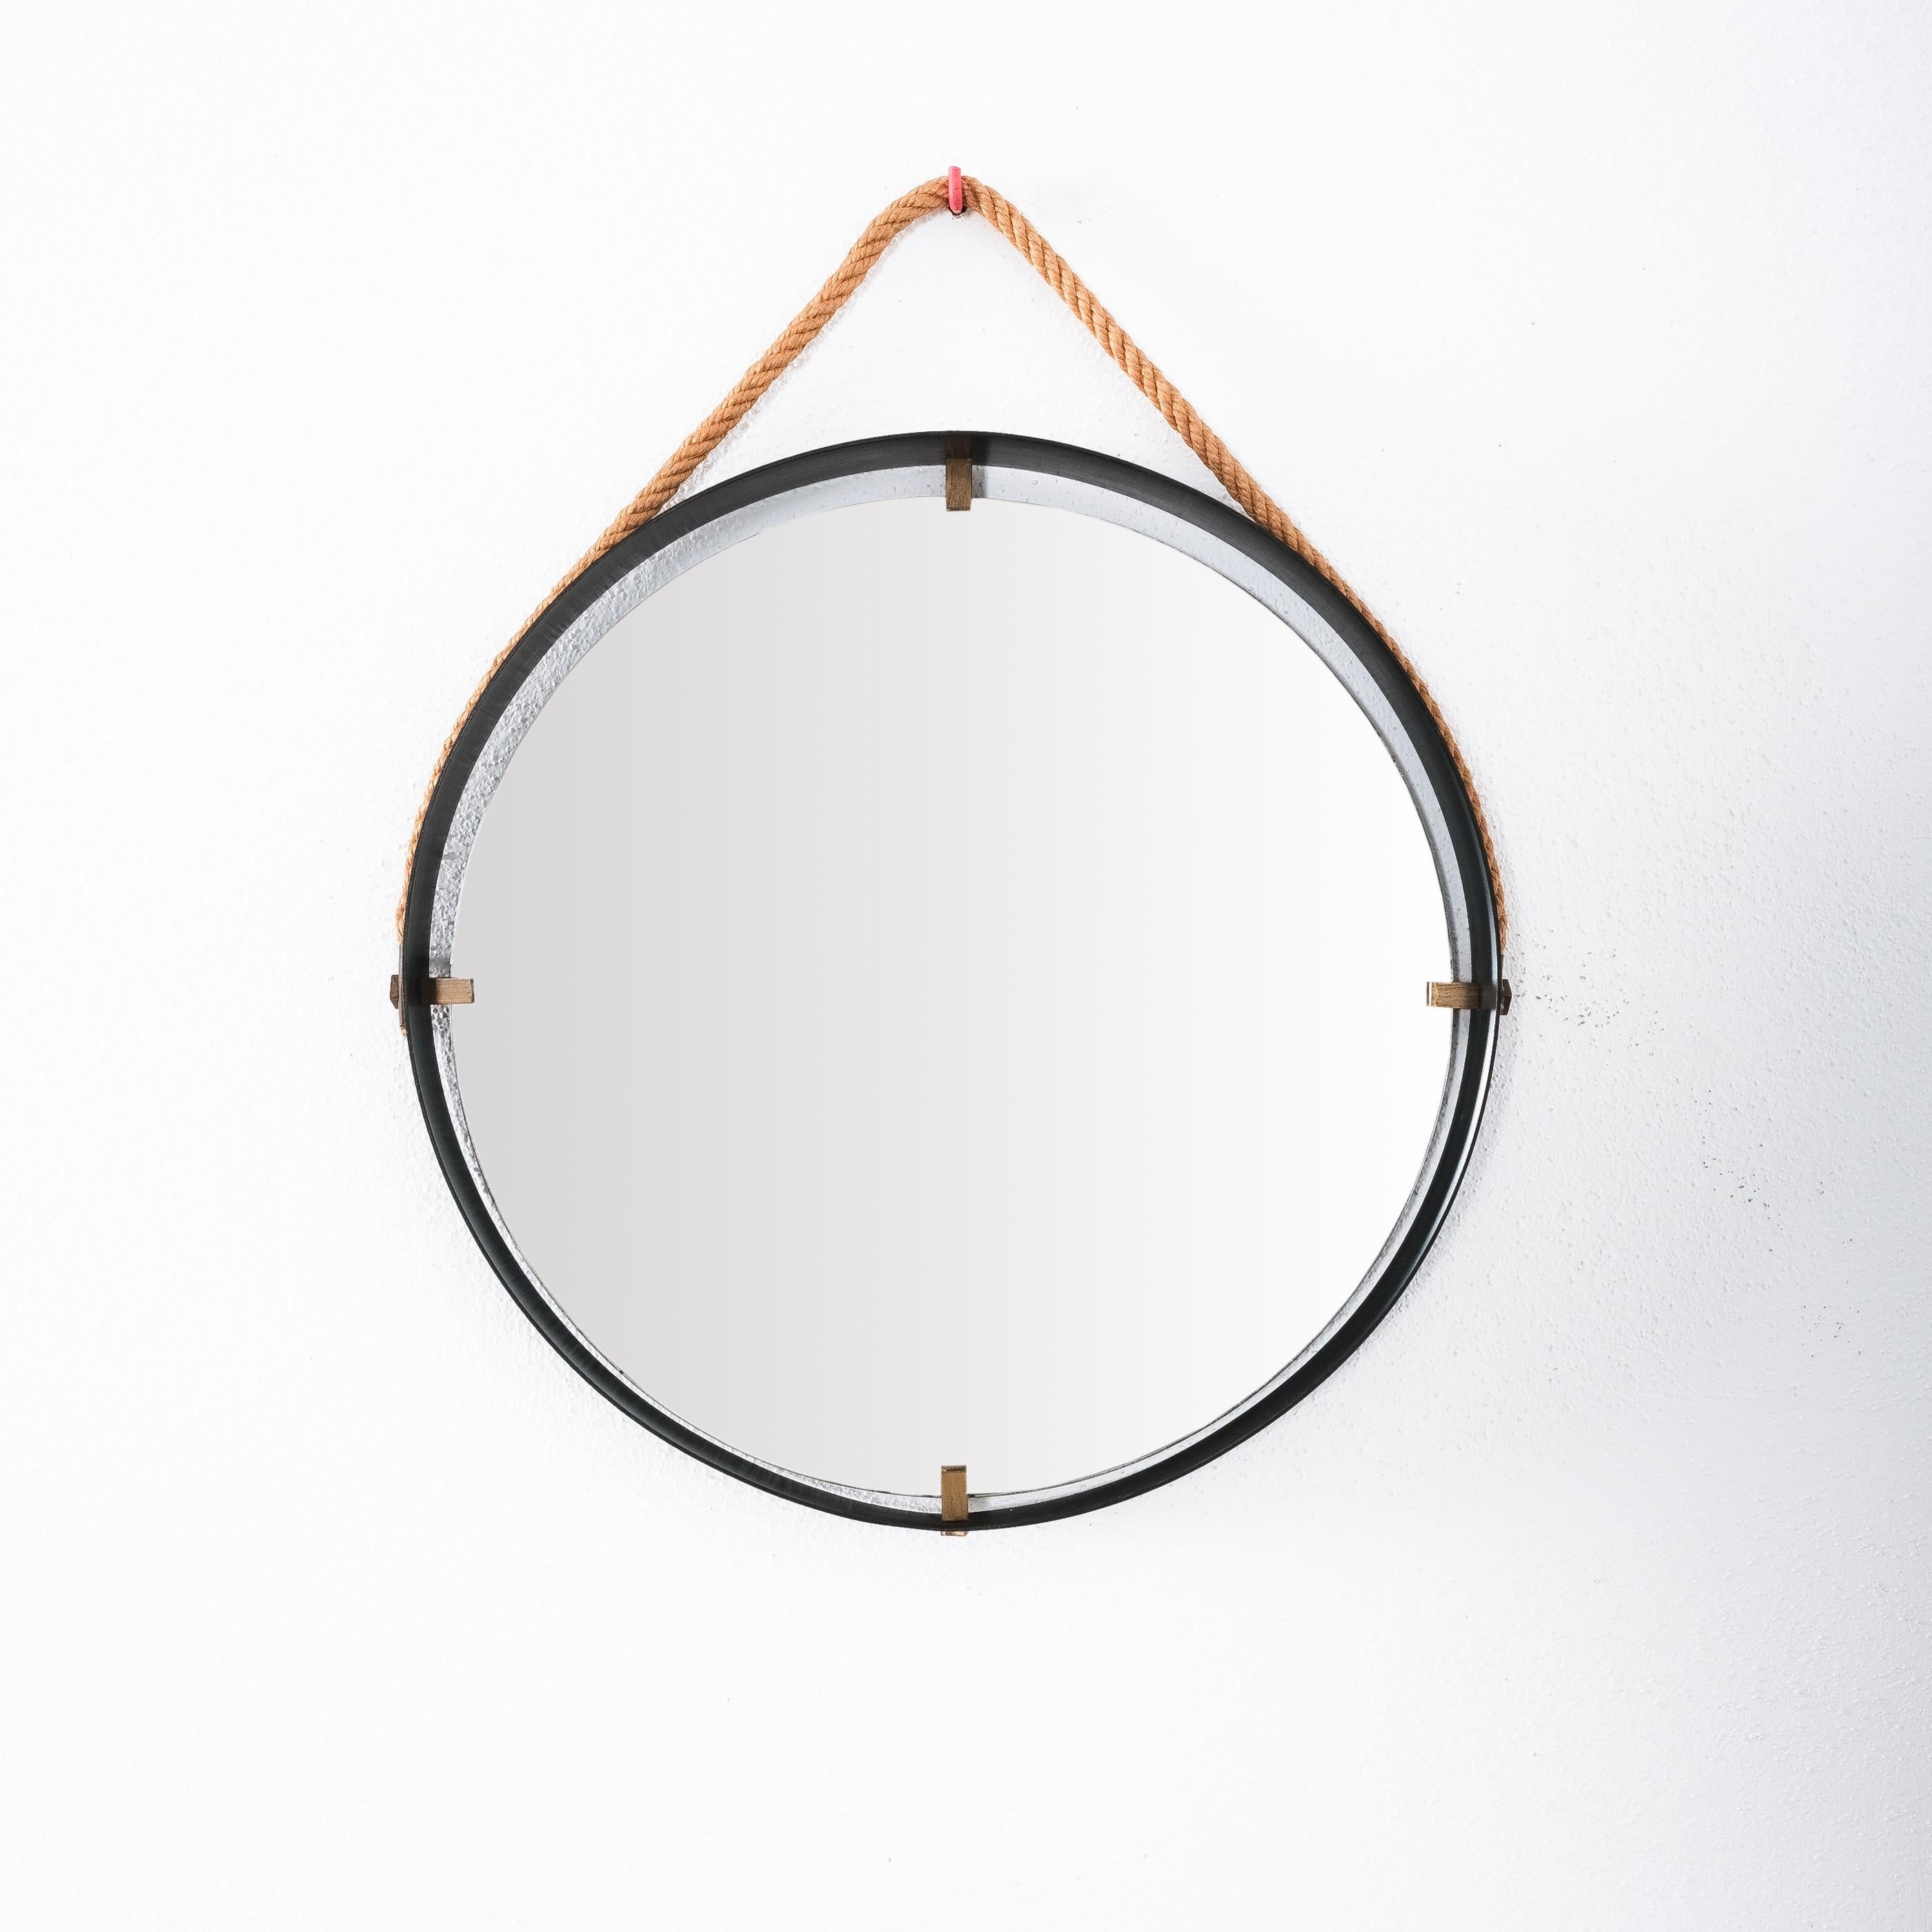 Floating iron frame mirror, Italy, circa 1955

Mid century Italian iron frame mirror with a cord suspension and brass details. 
It’s in great condition, the mirror glass shows minimal staining.
Dimensions are: 18.9